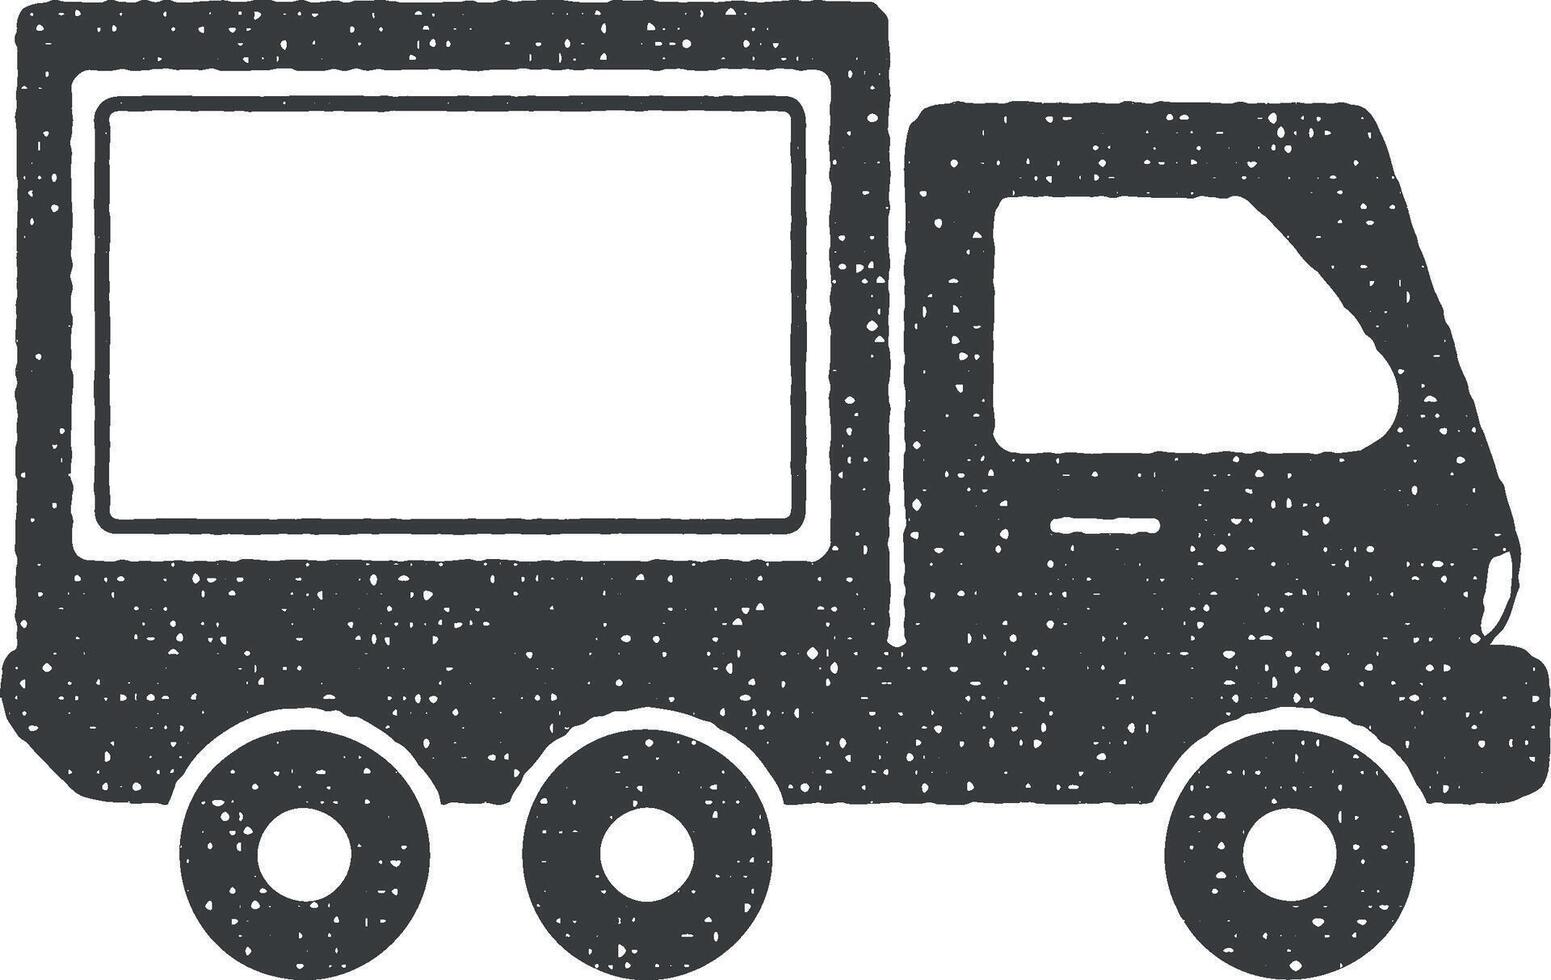 truck, billboard vector icon illustration with stamp effect